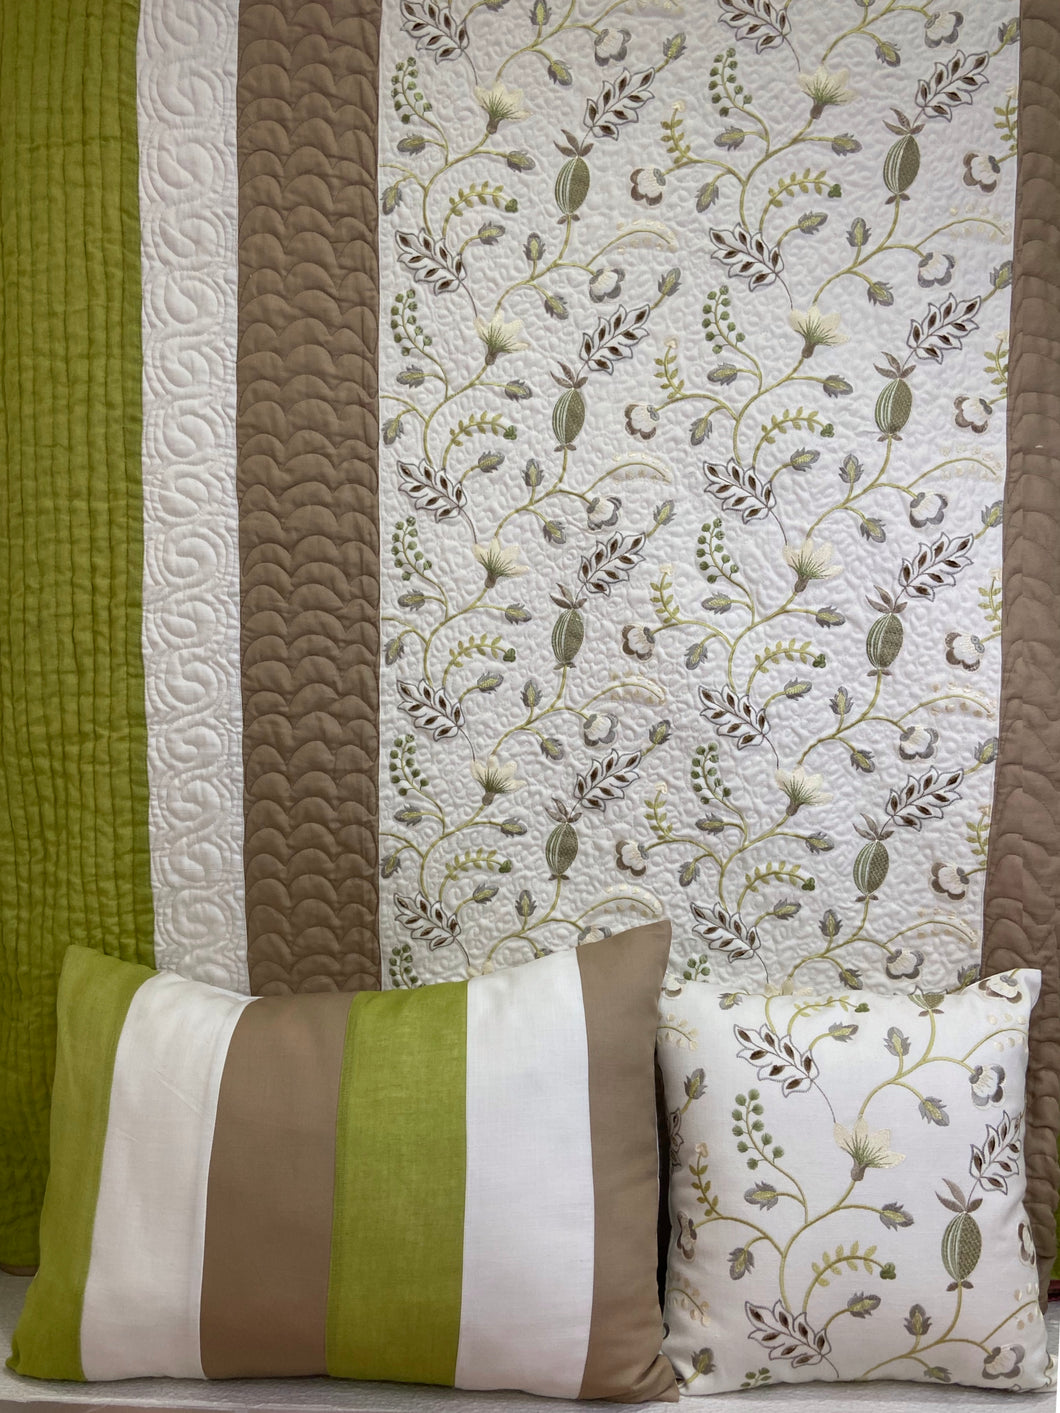 Ferns and Petals, Mint Green and Beige